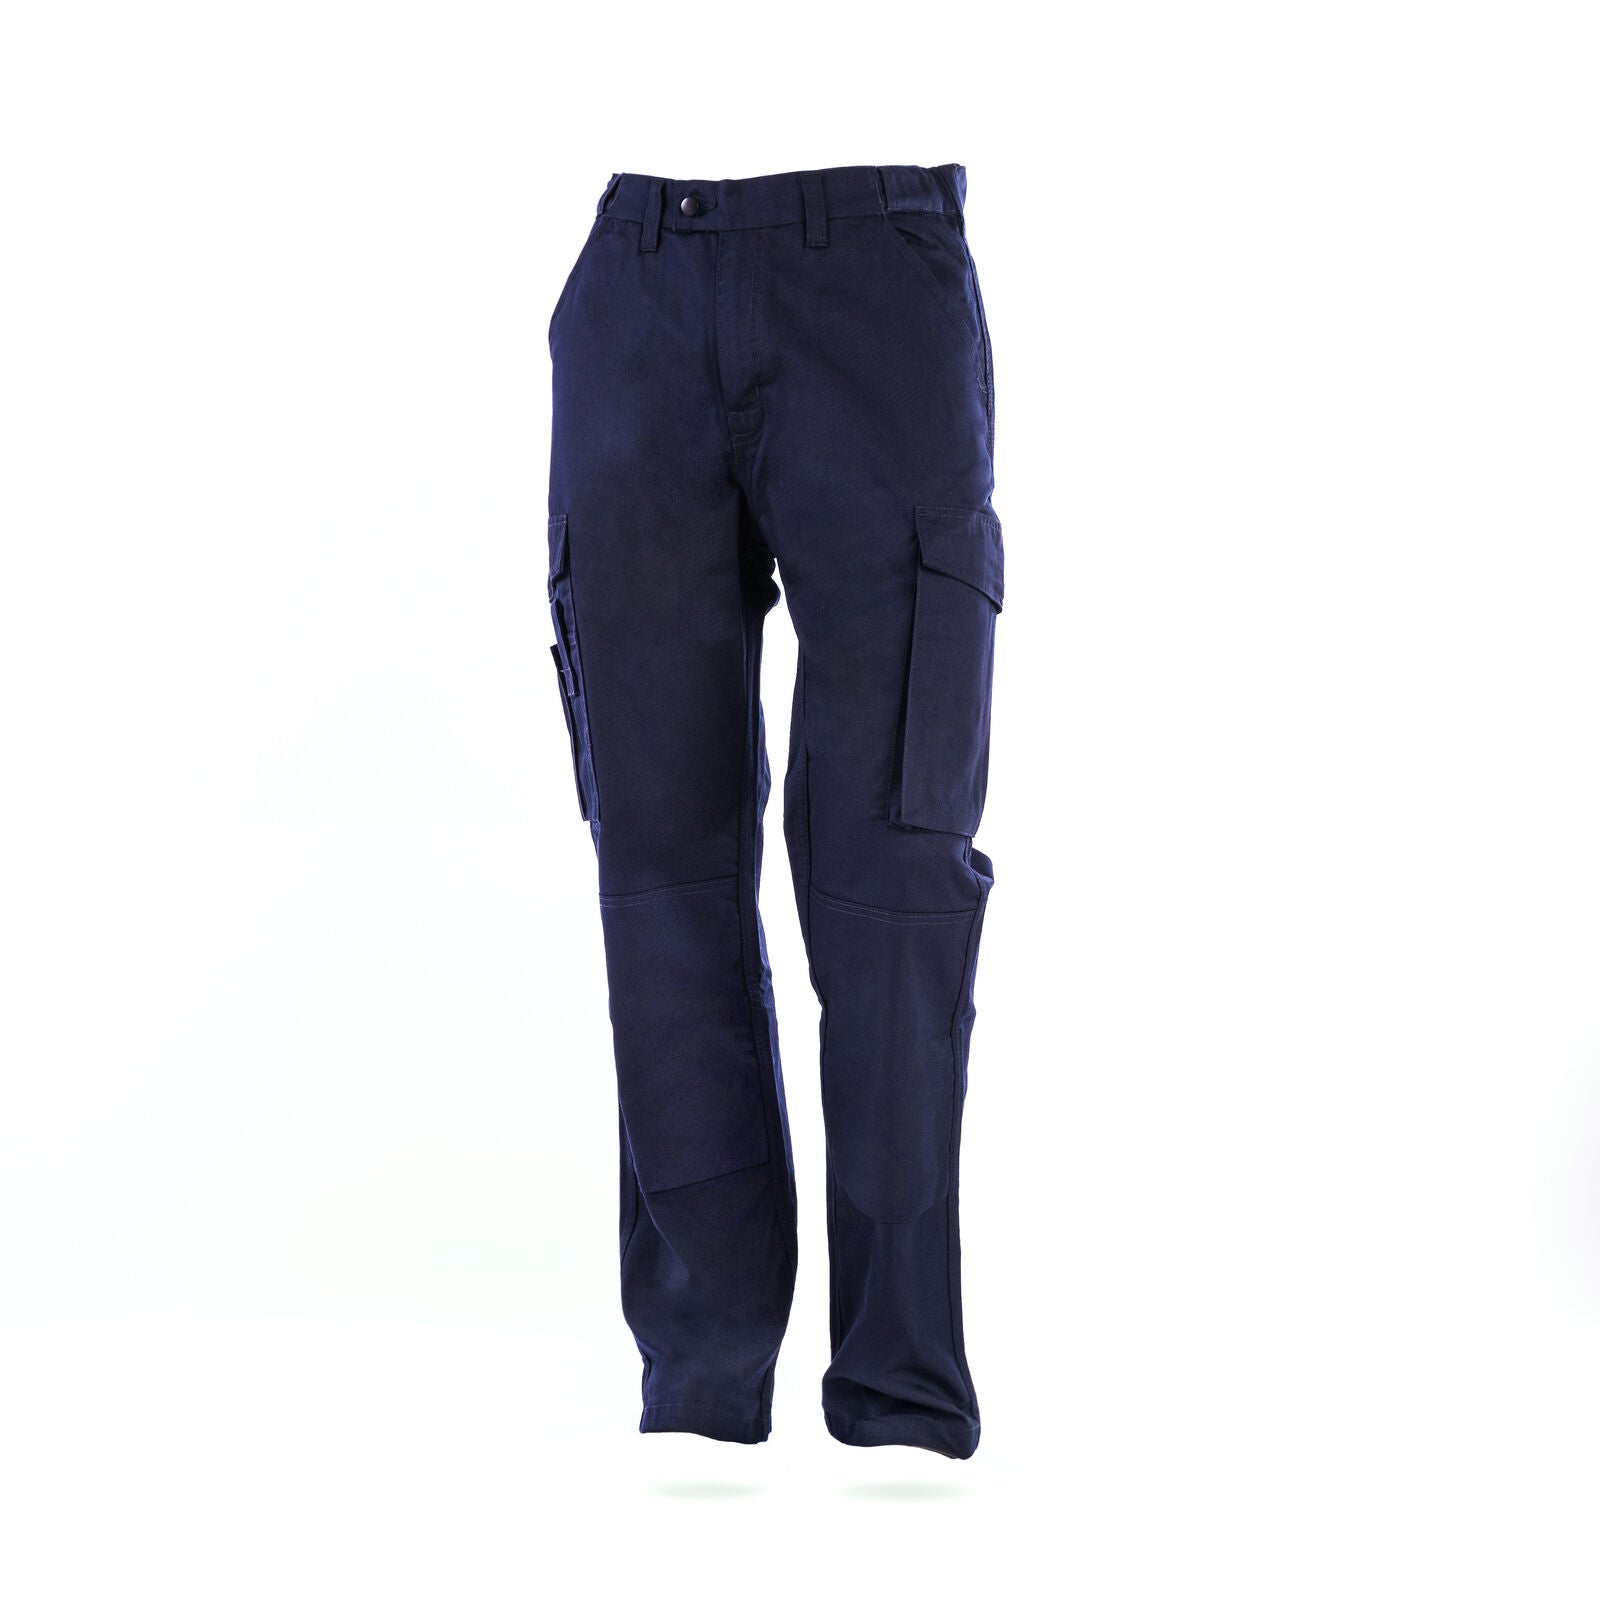 Bulkbuy OEM Mens Workwear Trousers with Multi Pockets Working Cargo Pant  price comparison